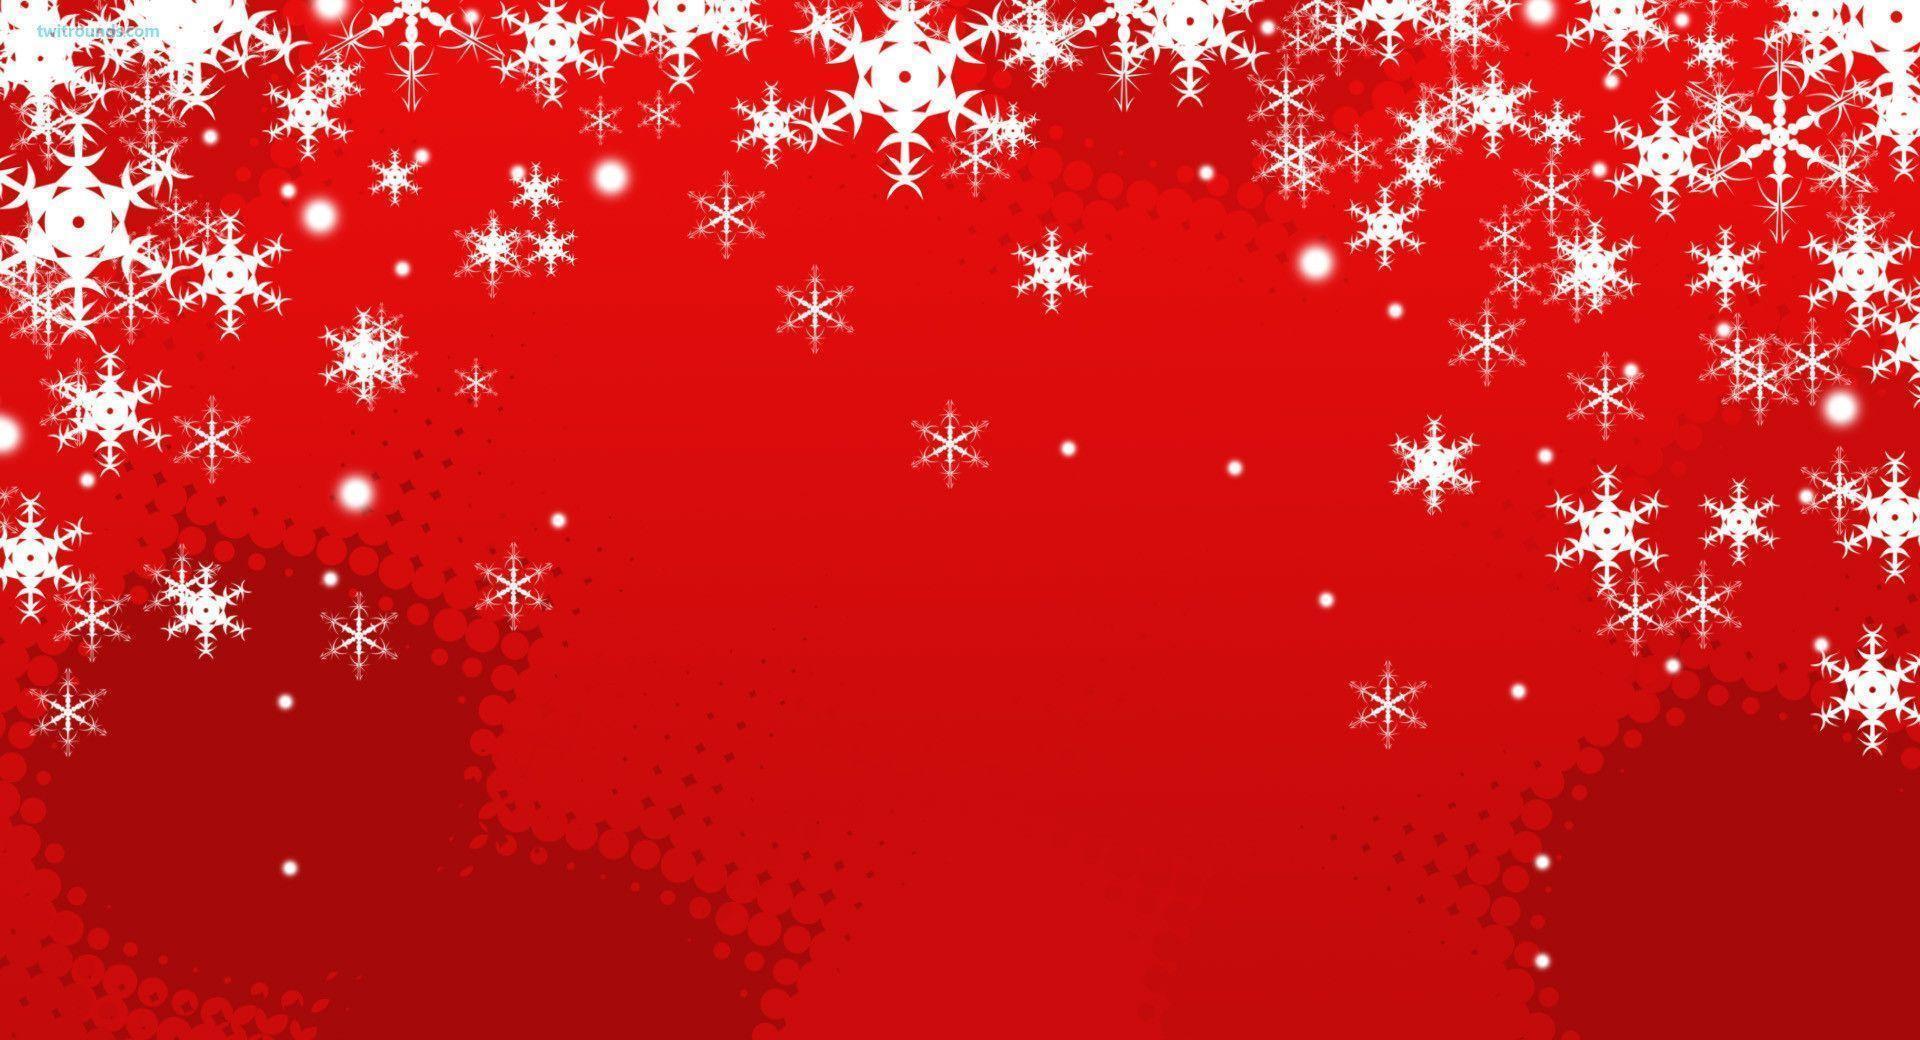 Red Christmas Backgrounds - Wallpaper Cave